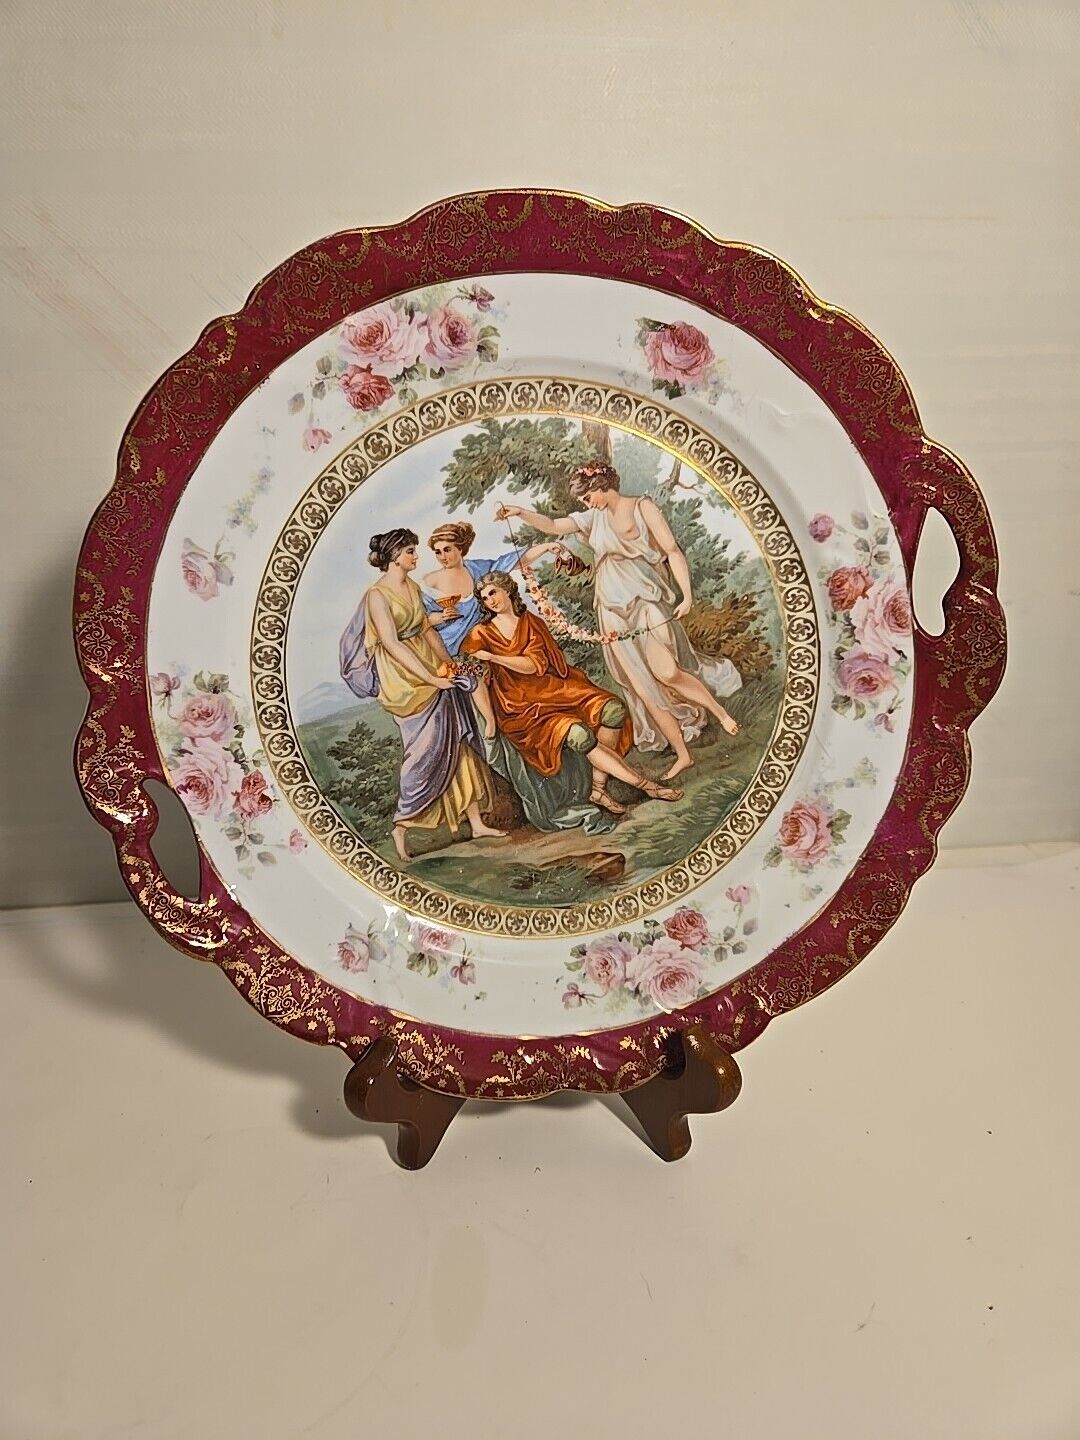 1900s Prov Saxe E S Germany Plate Hand Painted Decorative Plate Dionysus 